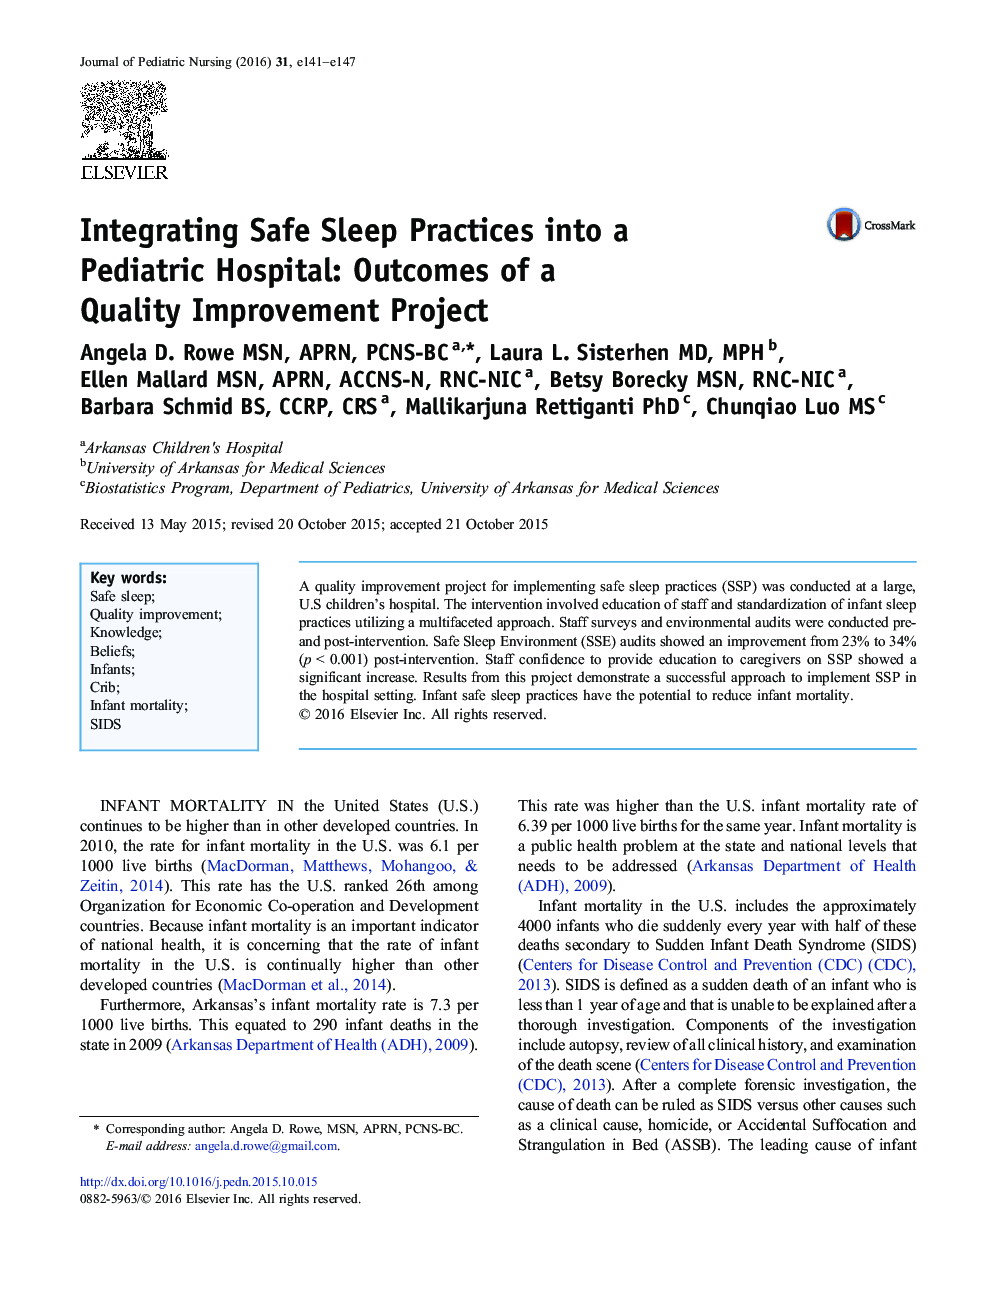 Integrating Safe Sleep Practices into a Pediatric Hospital: Outcomes of a Quality Improvement Project